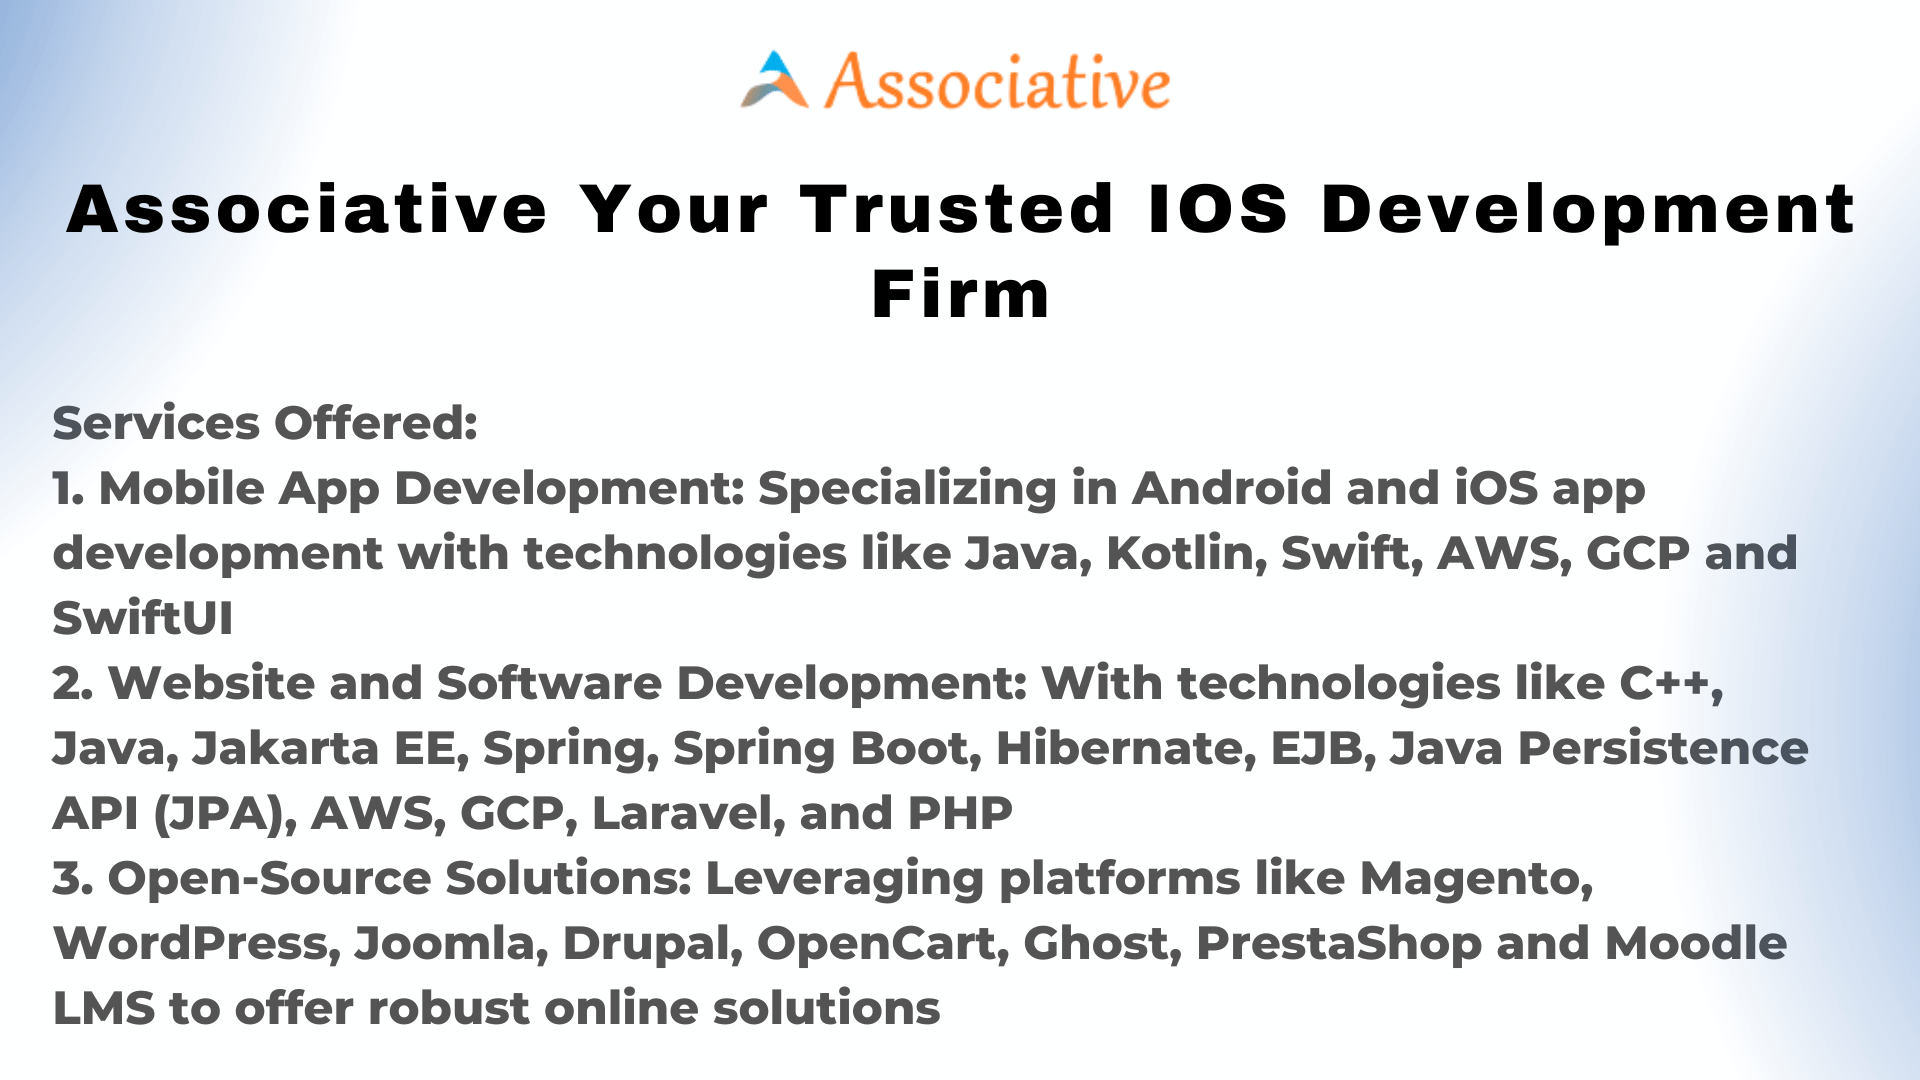 Associative Your Trusted IOS Development Firm